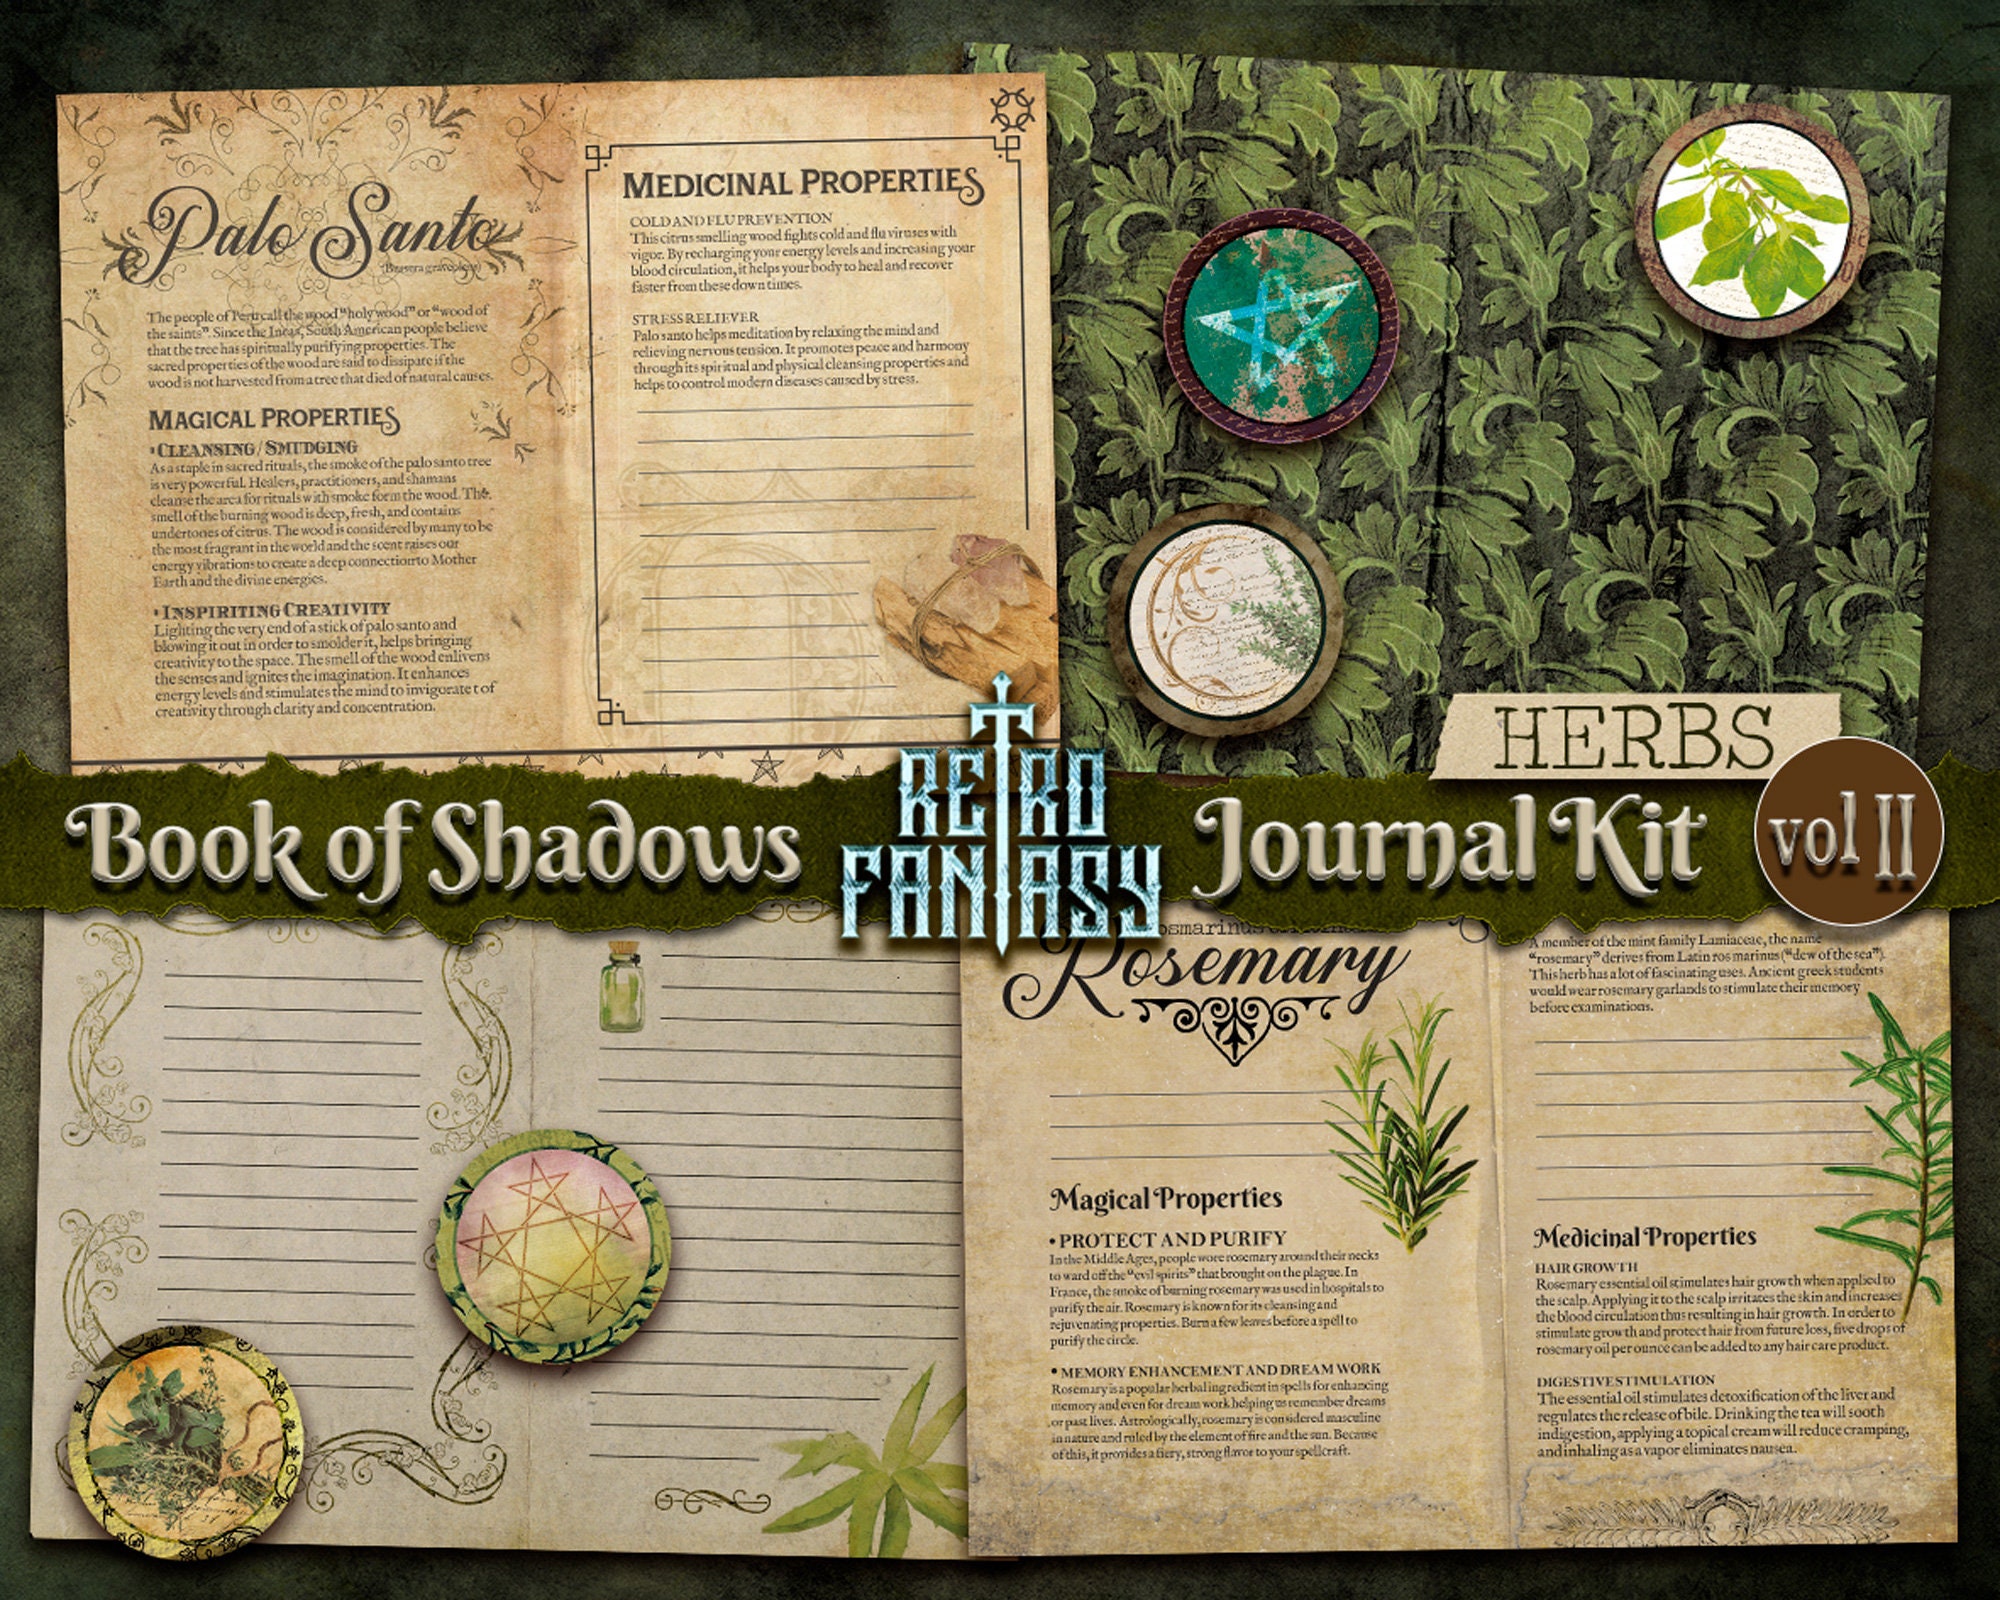 Book of Shadows Junk Journal Pages & Ephemera: 21 Sheets of Decorative Paper/Printed One-Sided/Vintage Moon, Goddess, Botanical, Tarot, Fairies, Gothic Ravens & Black Cat Designs/Perfect Magical Gift [Book]